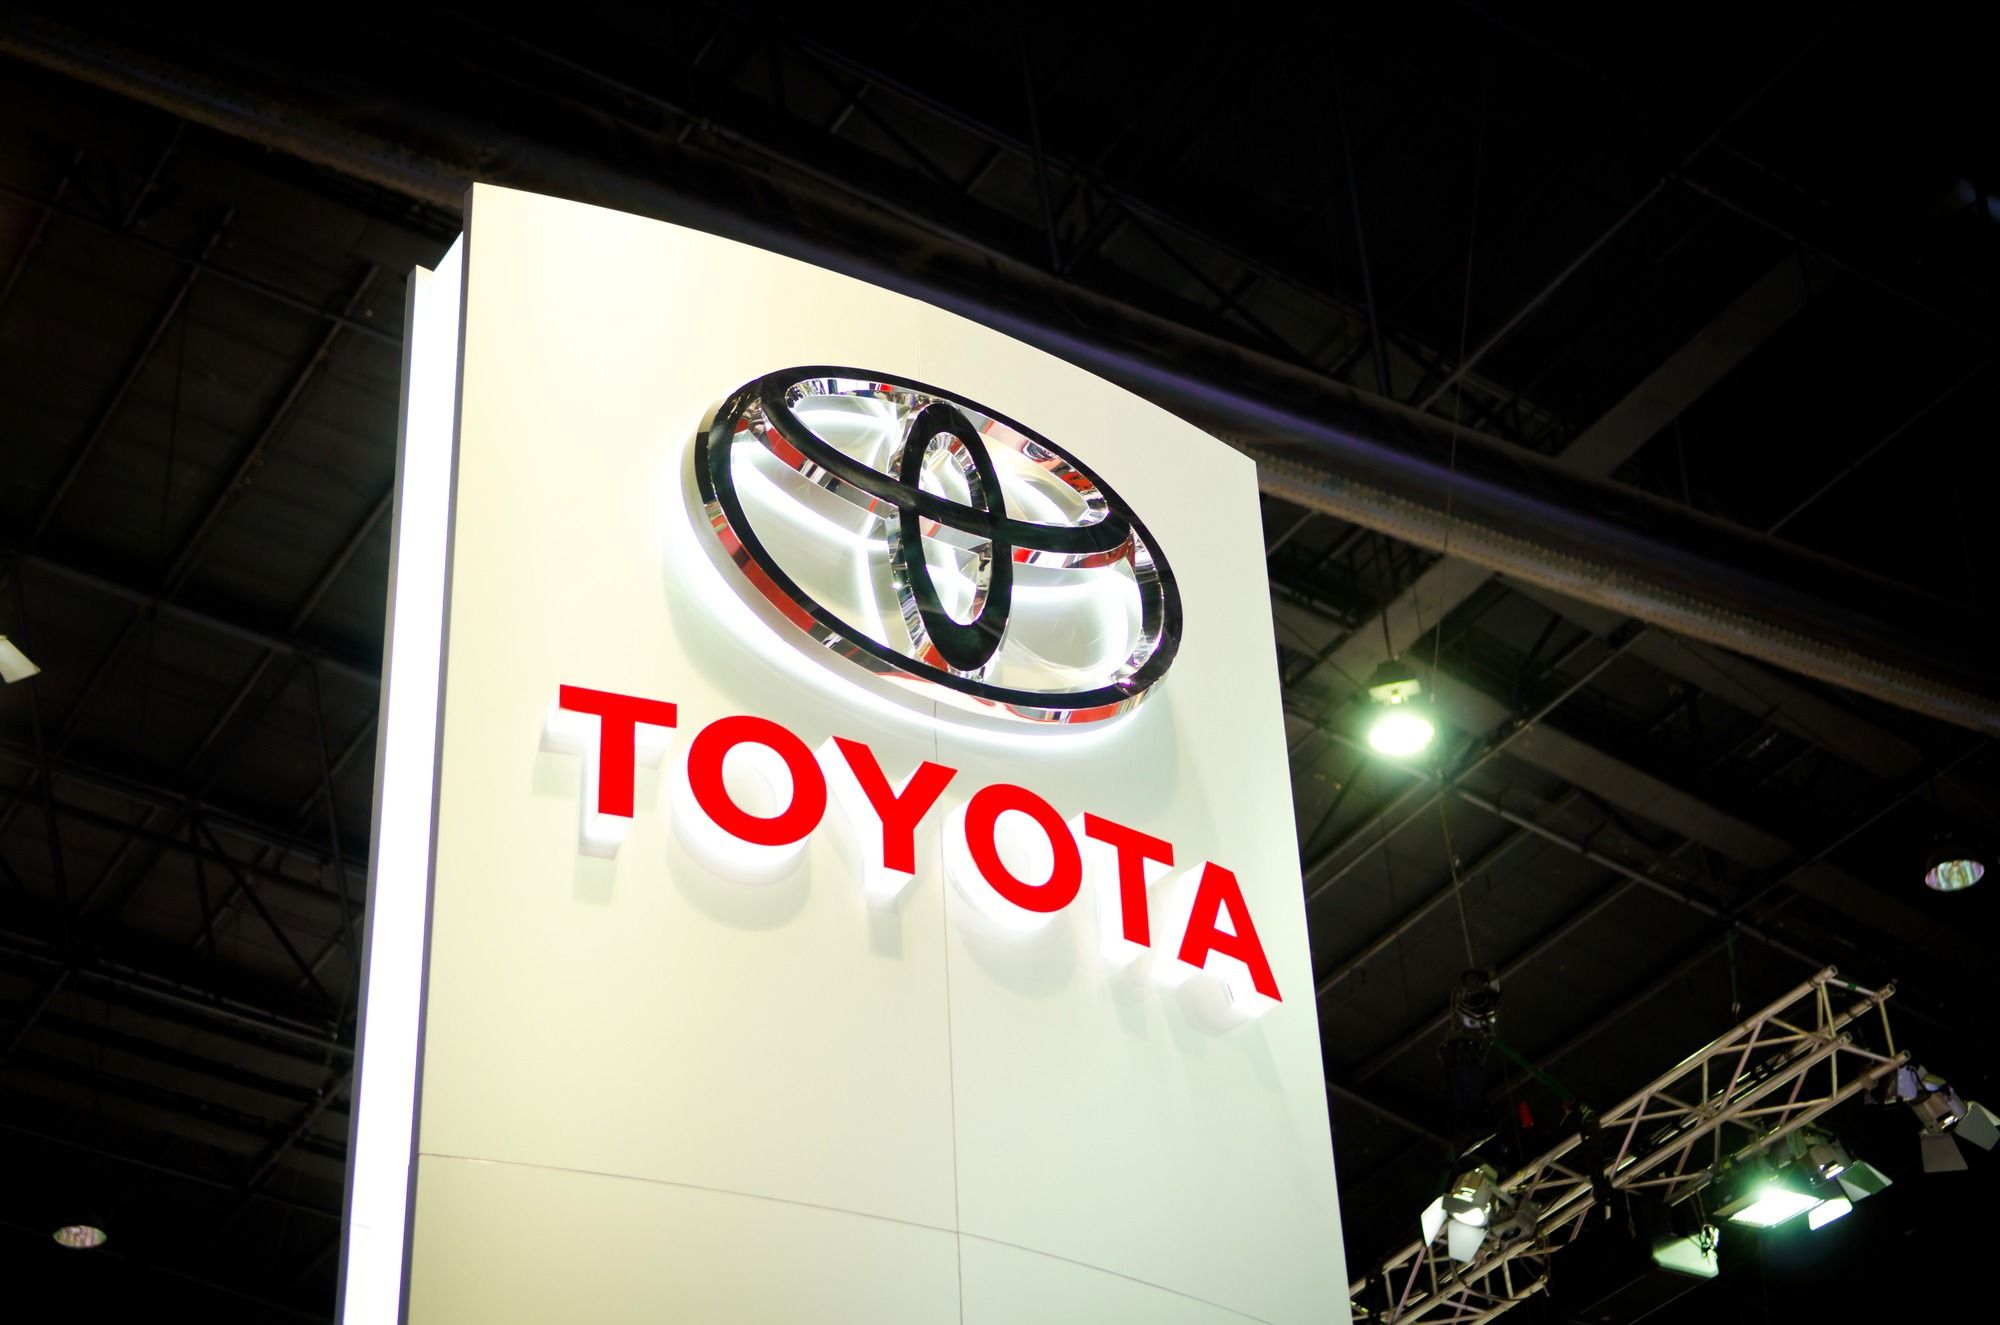 Toyota sign regarding the echo defect alleged in a class action lawsuit